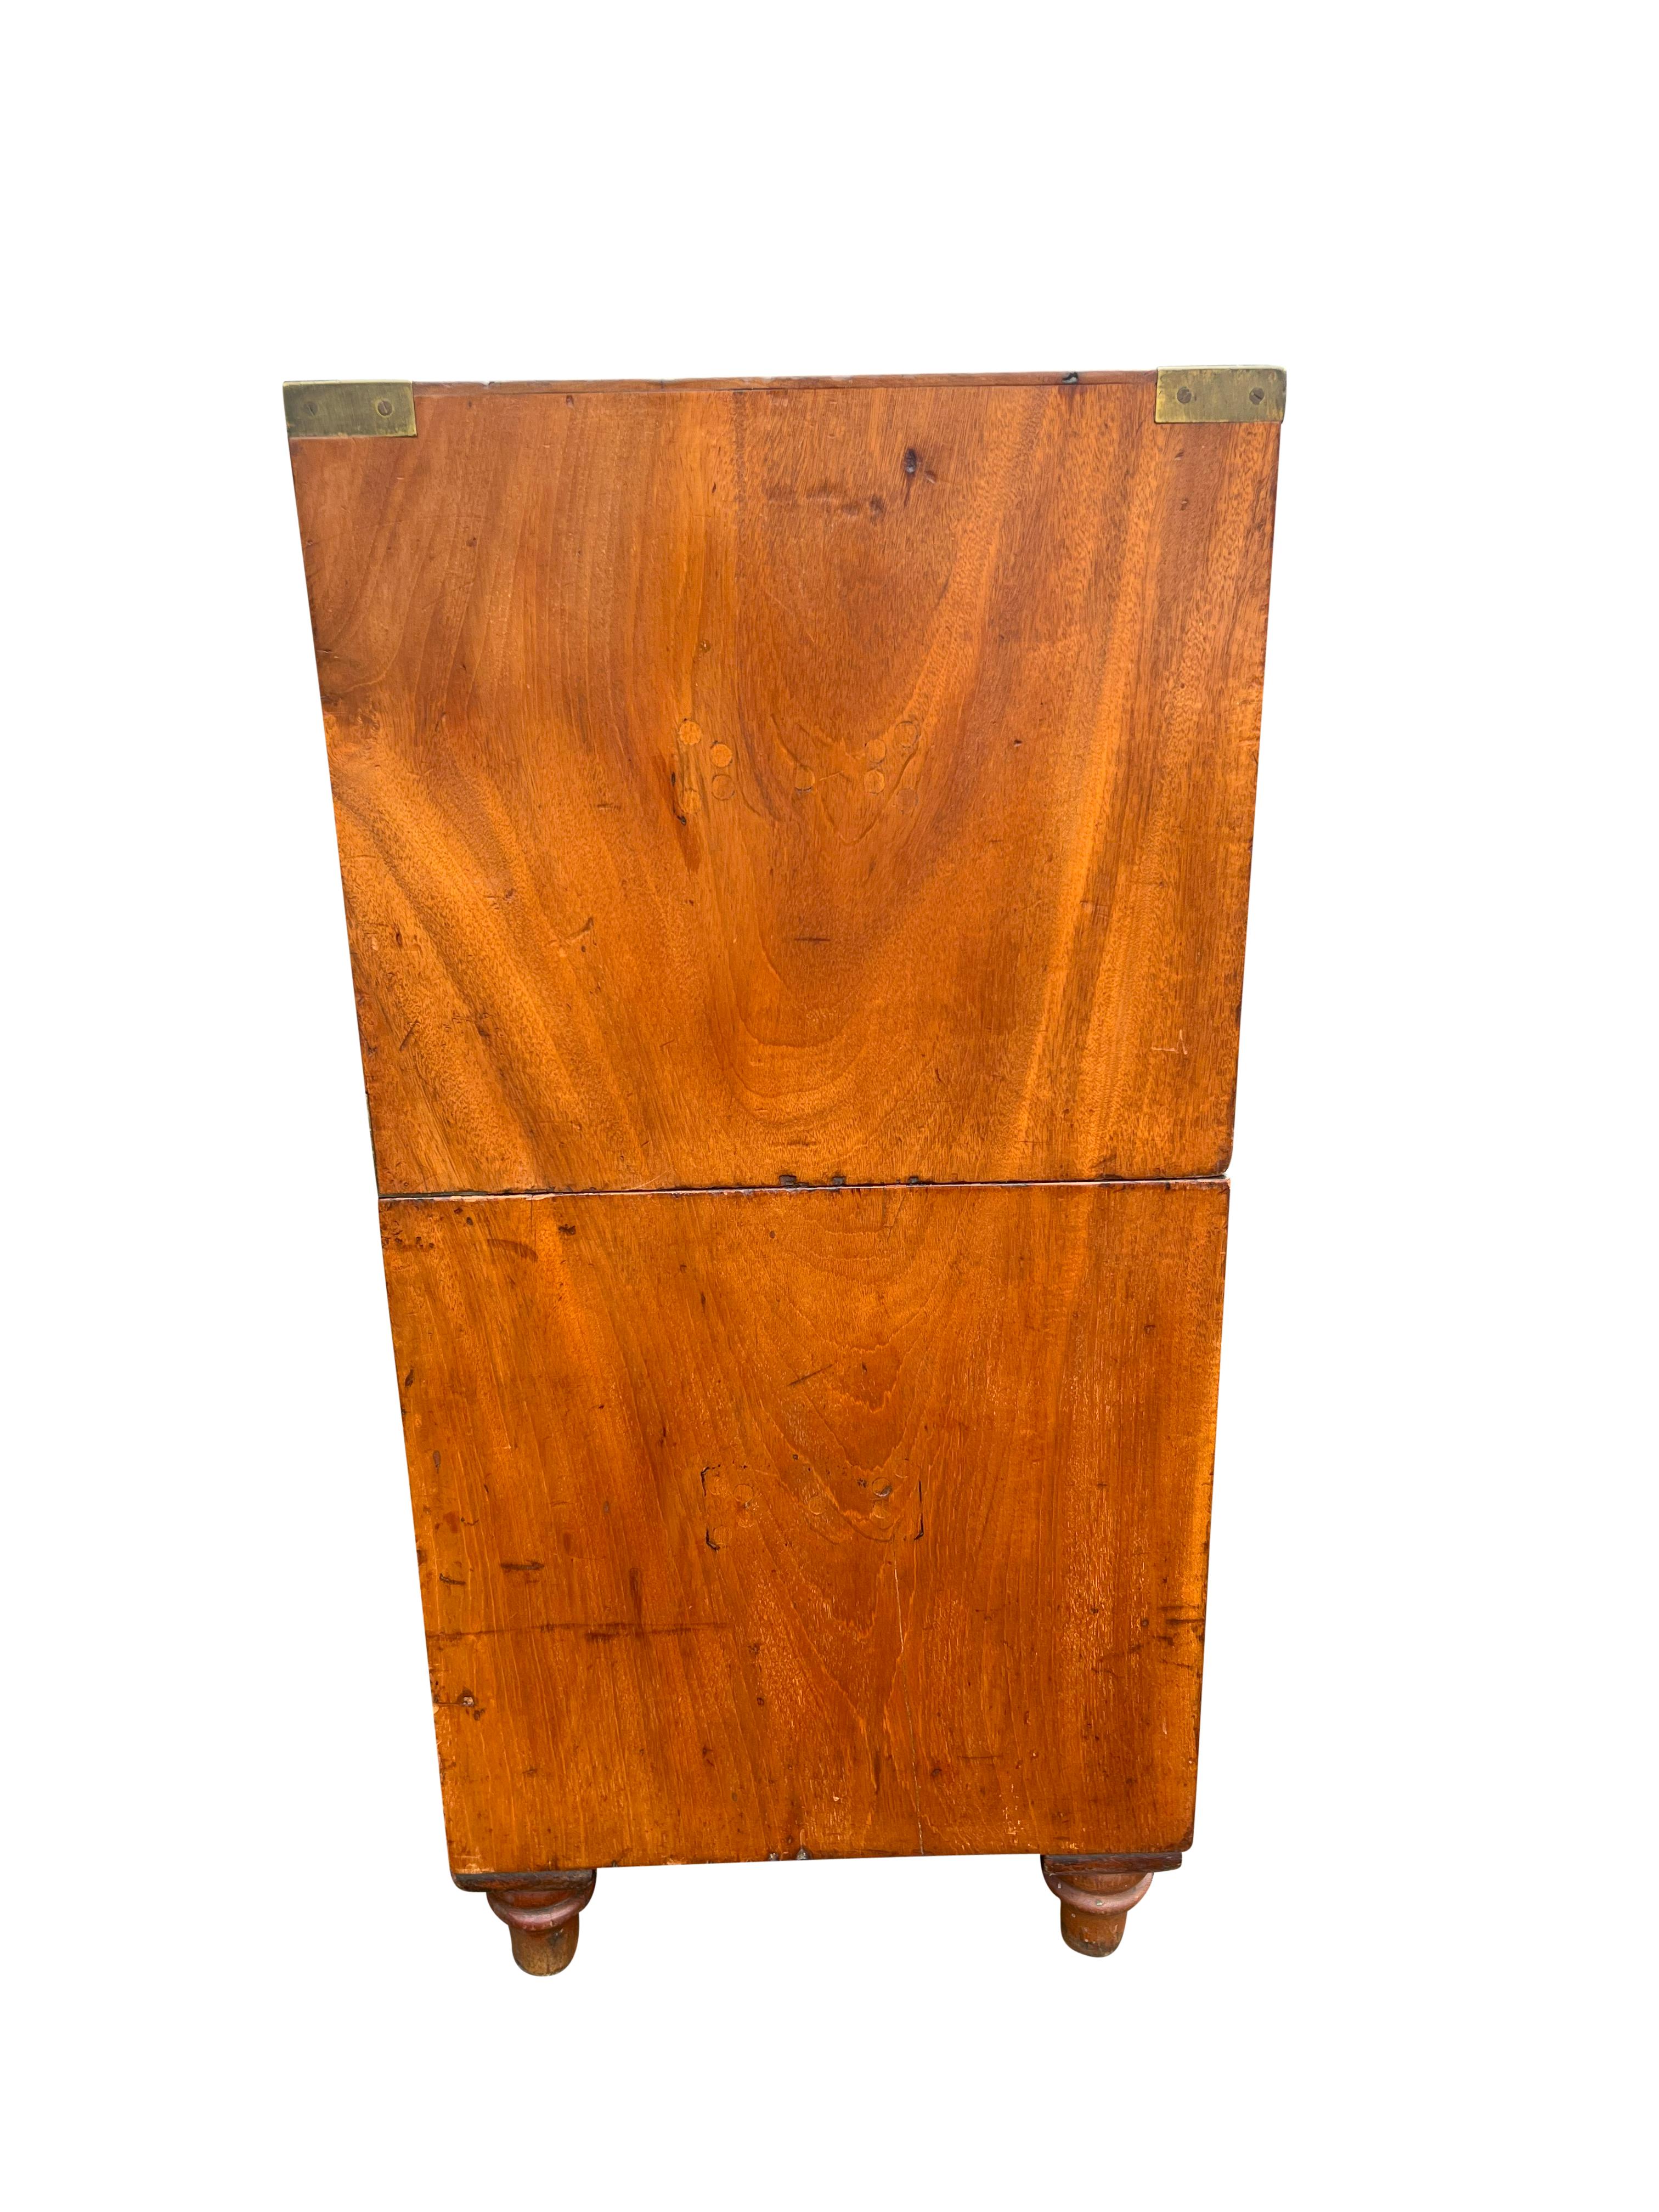 19th Century British Military Mahogany Campaign Chest For Sale